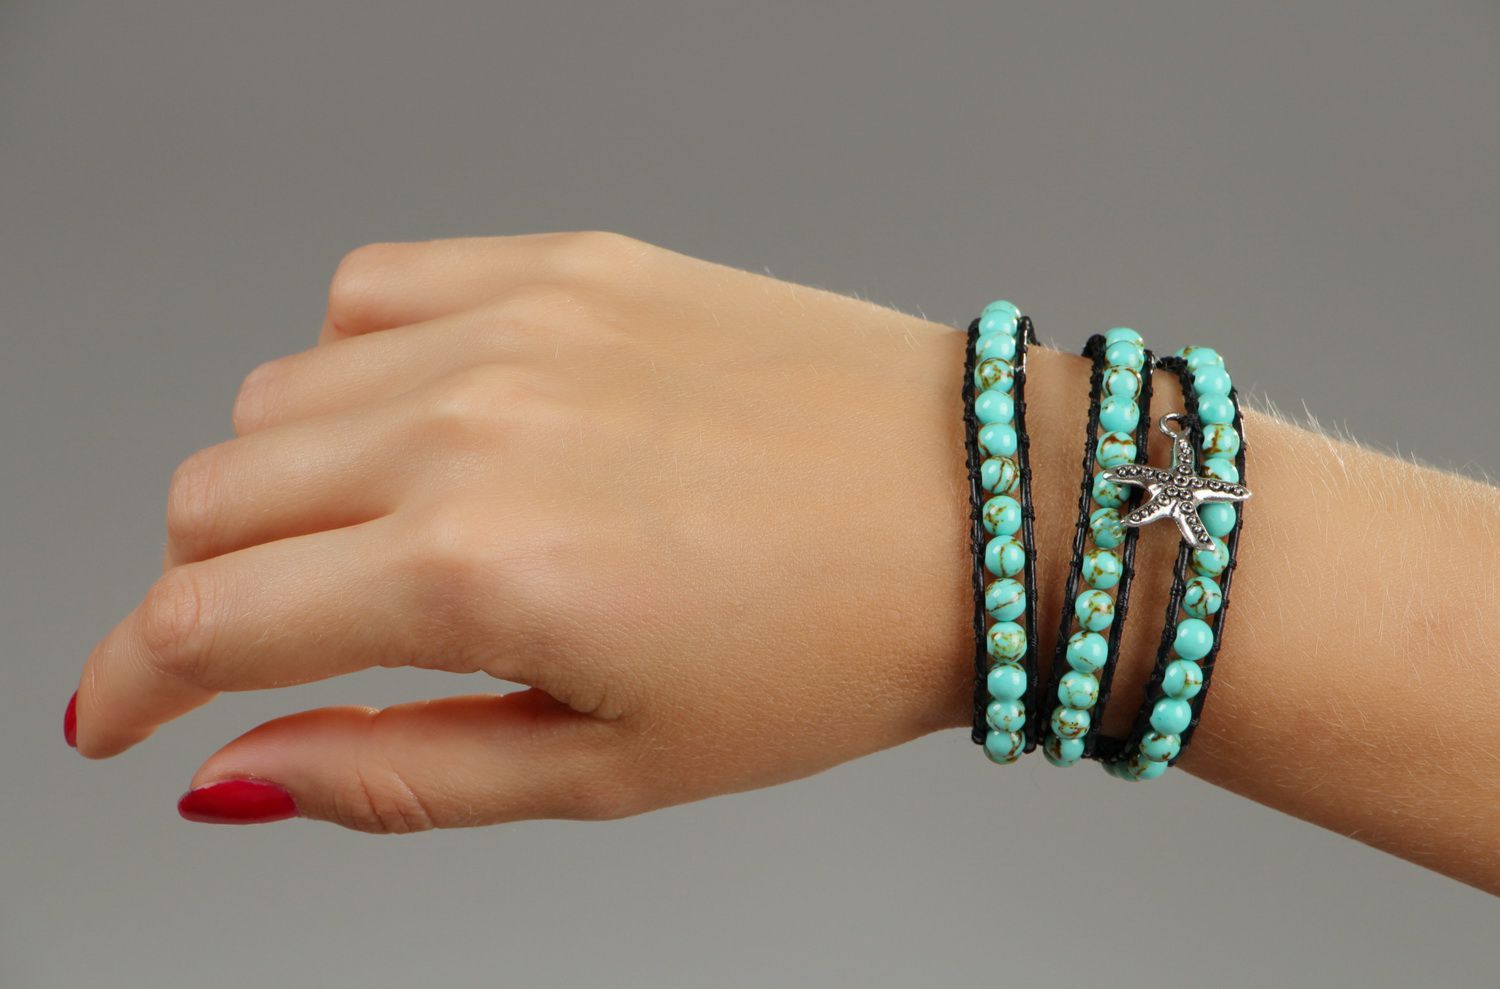 Bracelet made of turquoise stones and leather photo 4